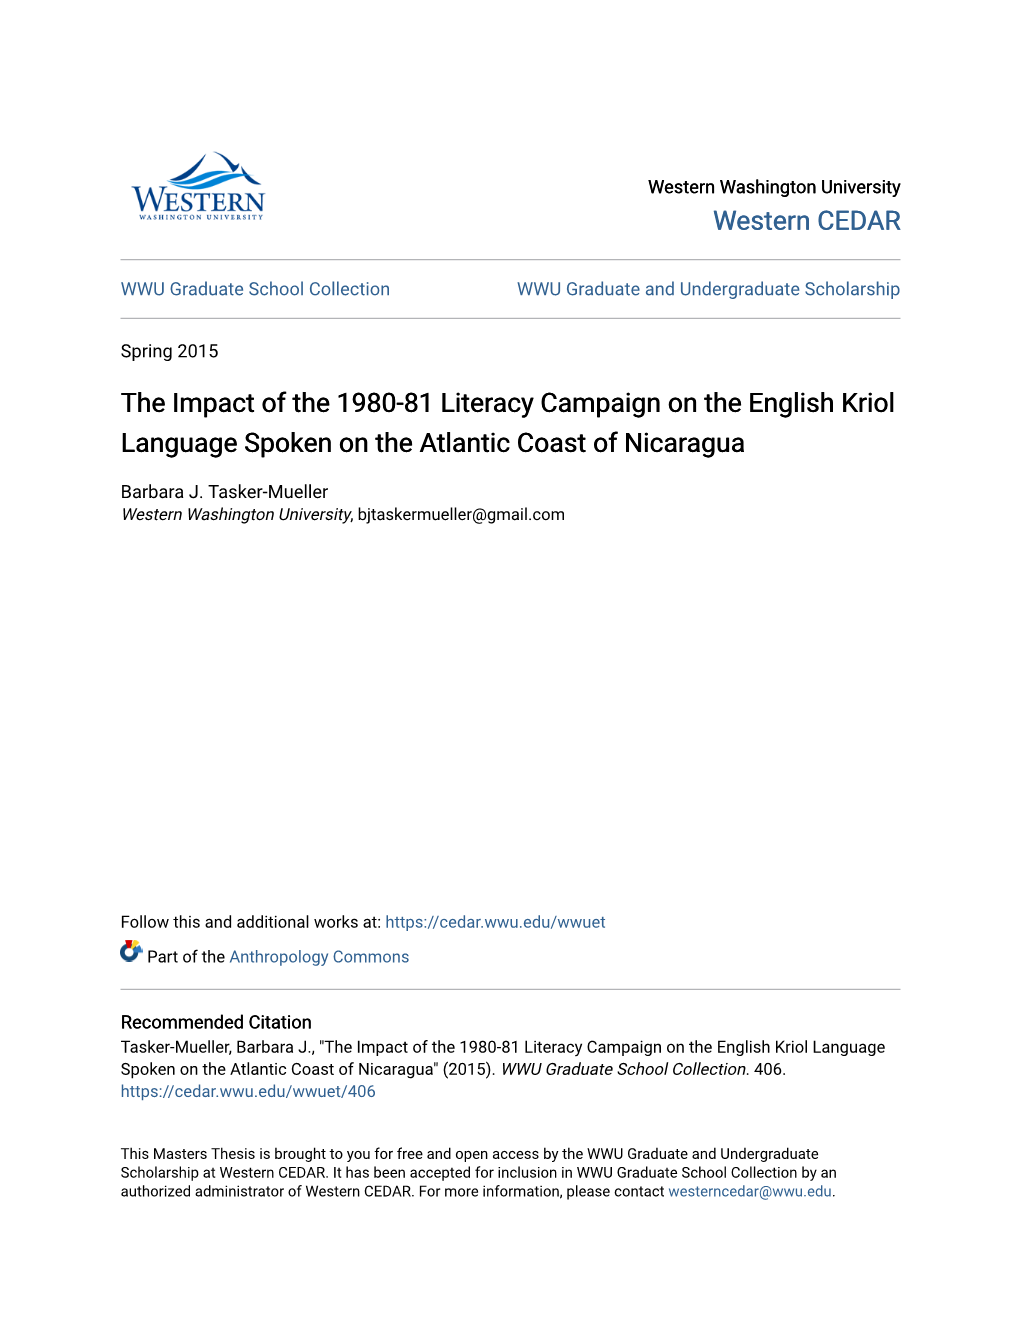 The Impact of the 1980-81 Literacy Campaign on the English Kriol Language Spoken on the Atlantic Coast of Nicaragua